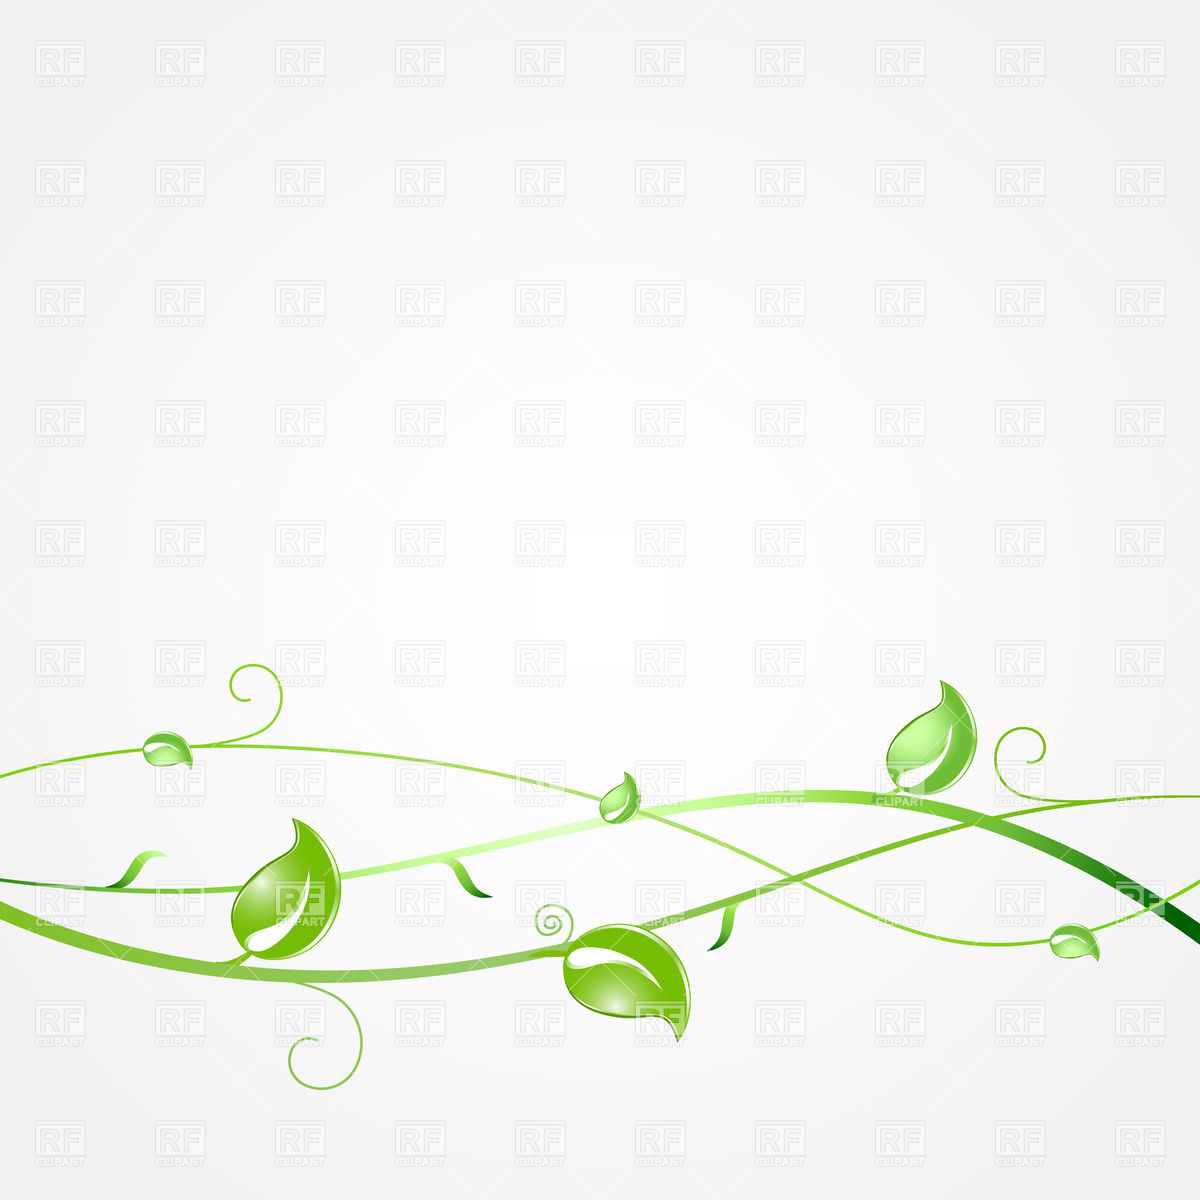 Green Leaves Border   Clipart Panda   Free Clipart Images